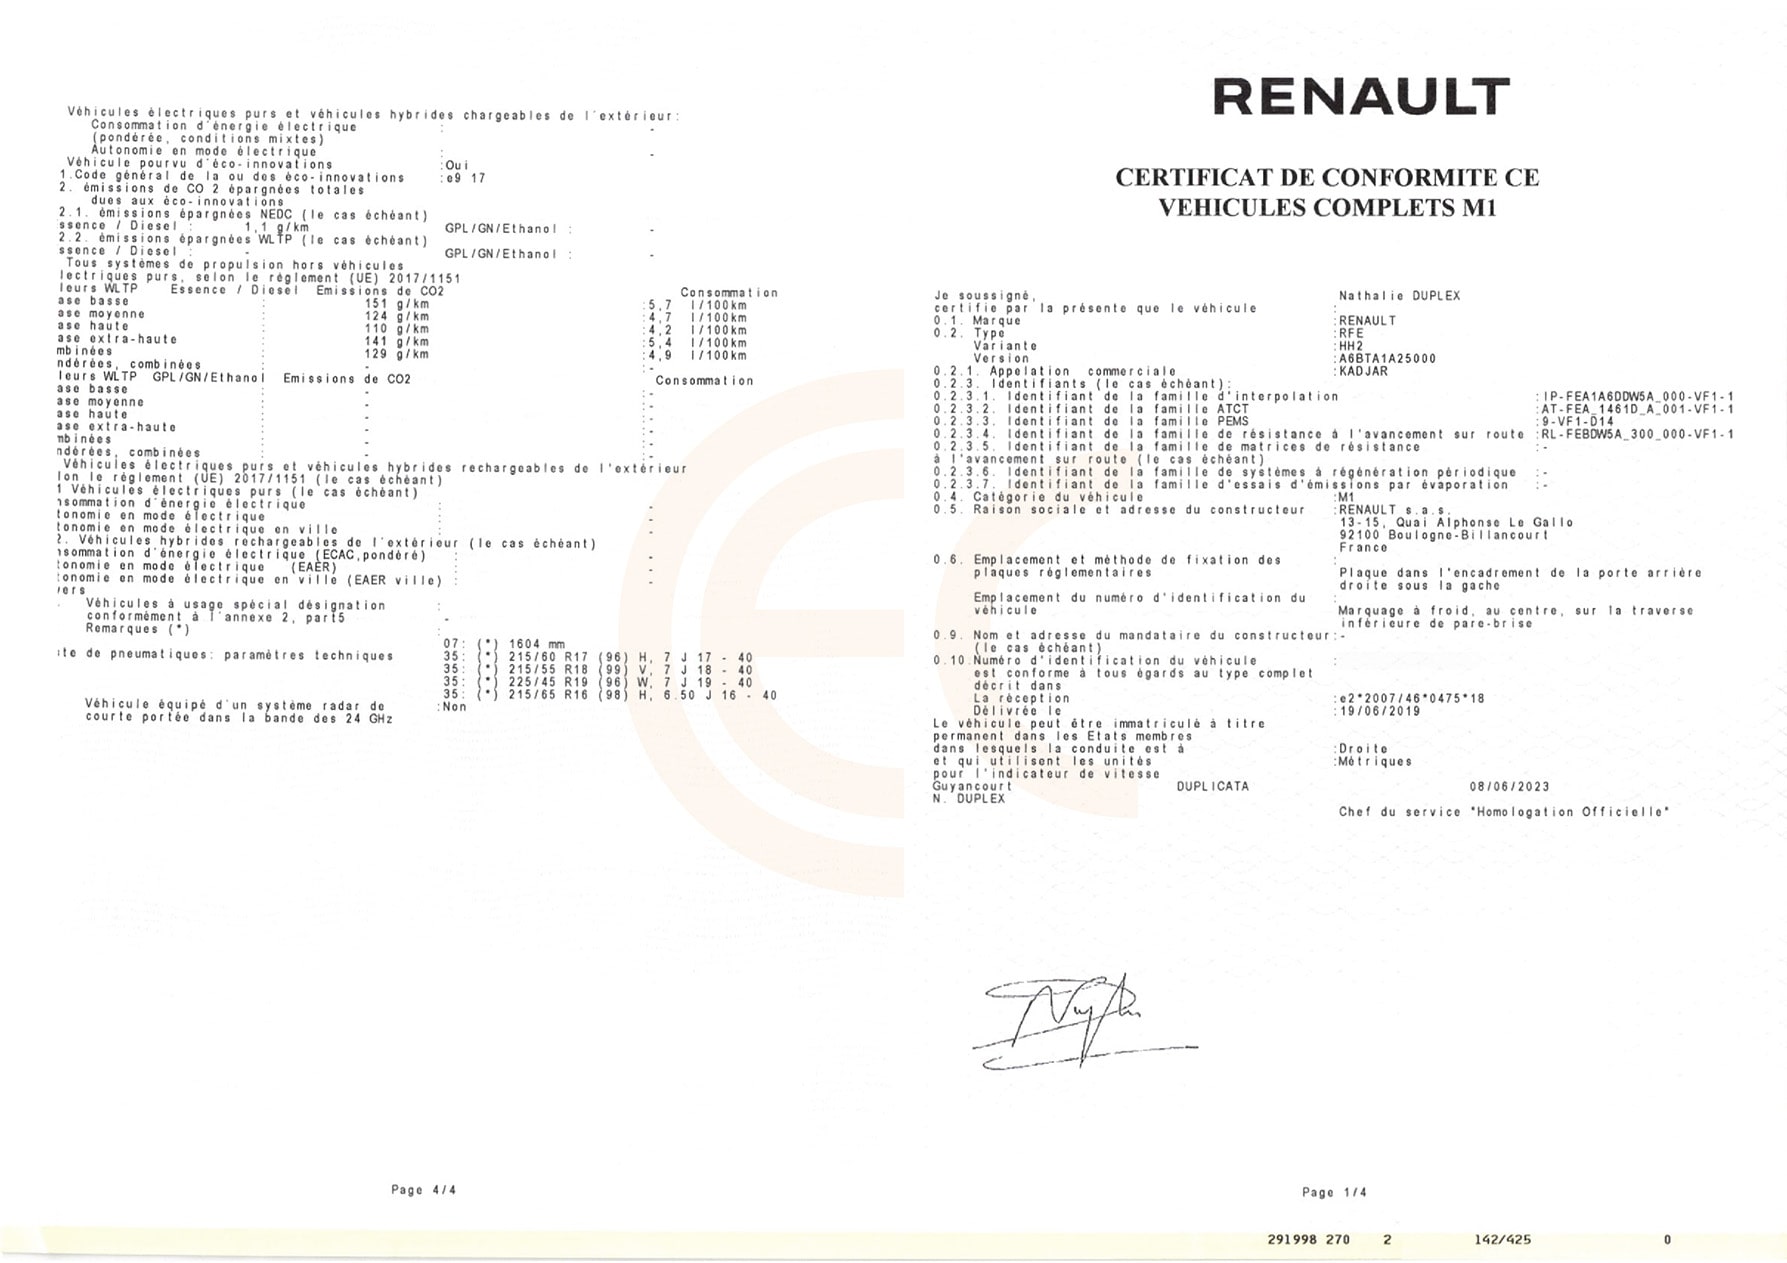 An example of COC document for Renault car.